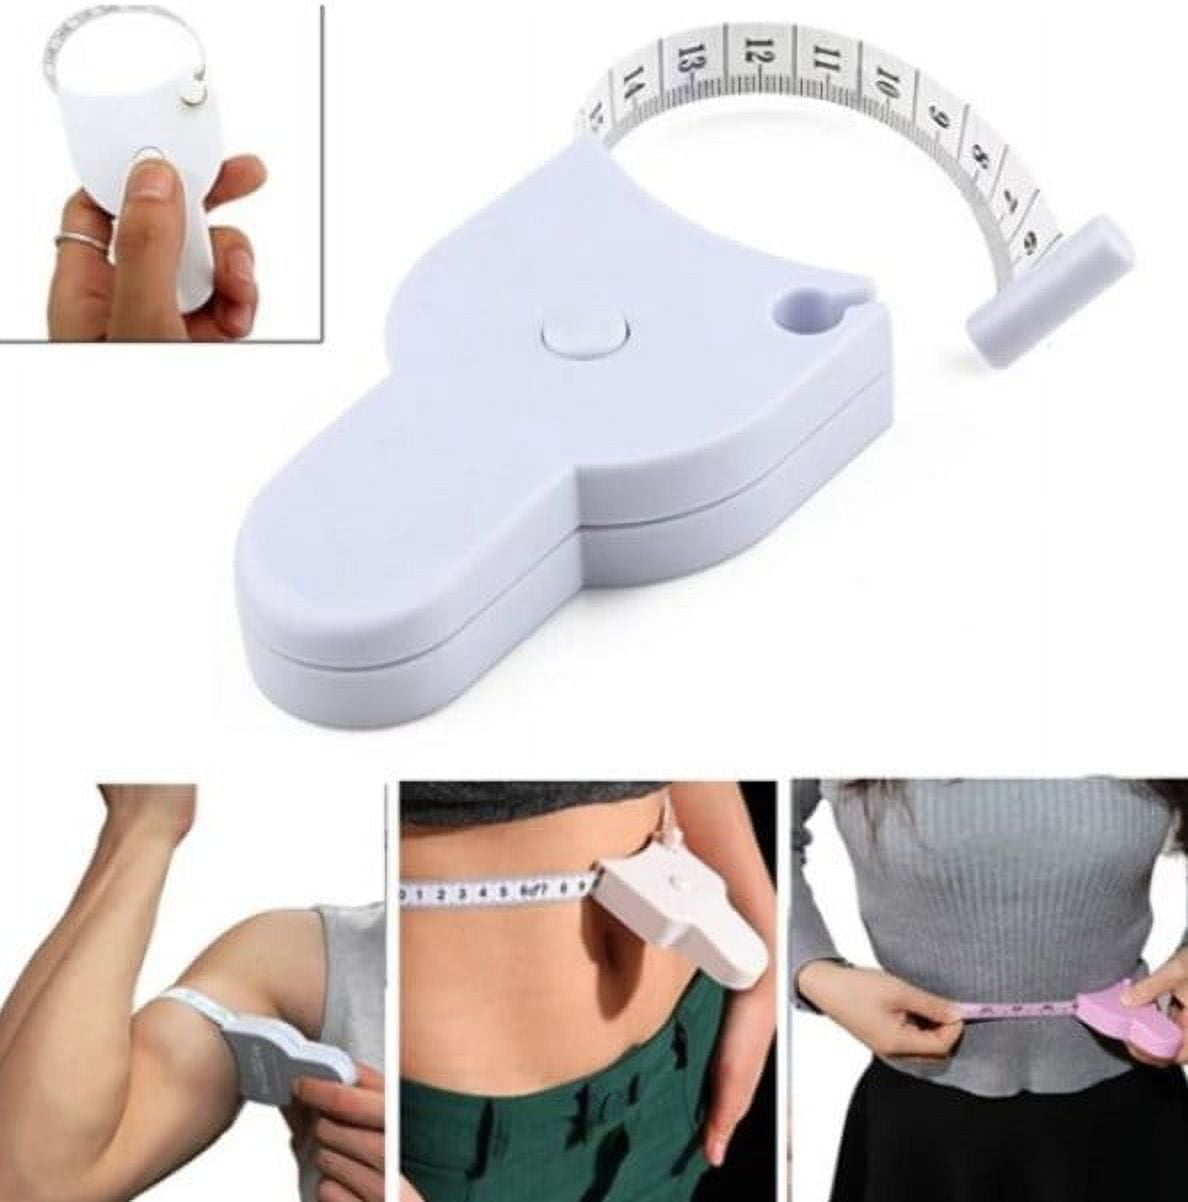 esLife Body Tape Measure 60 [Clip-Lock & Eject Release & Retract] 150cm, Self Measuring Tape Accurate for Tracking Weight Loss, Tailoring, Crafts